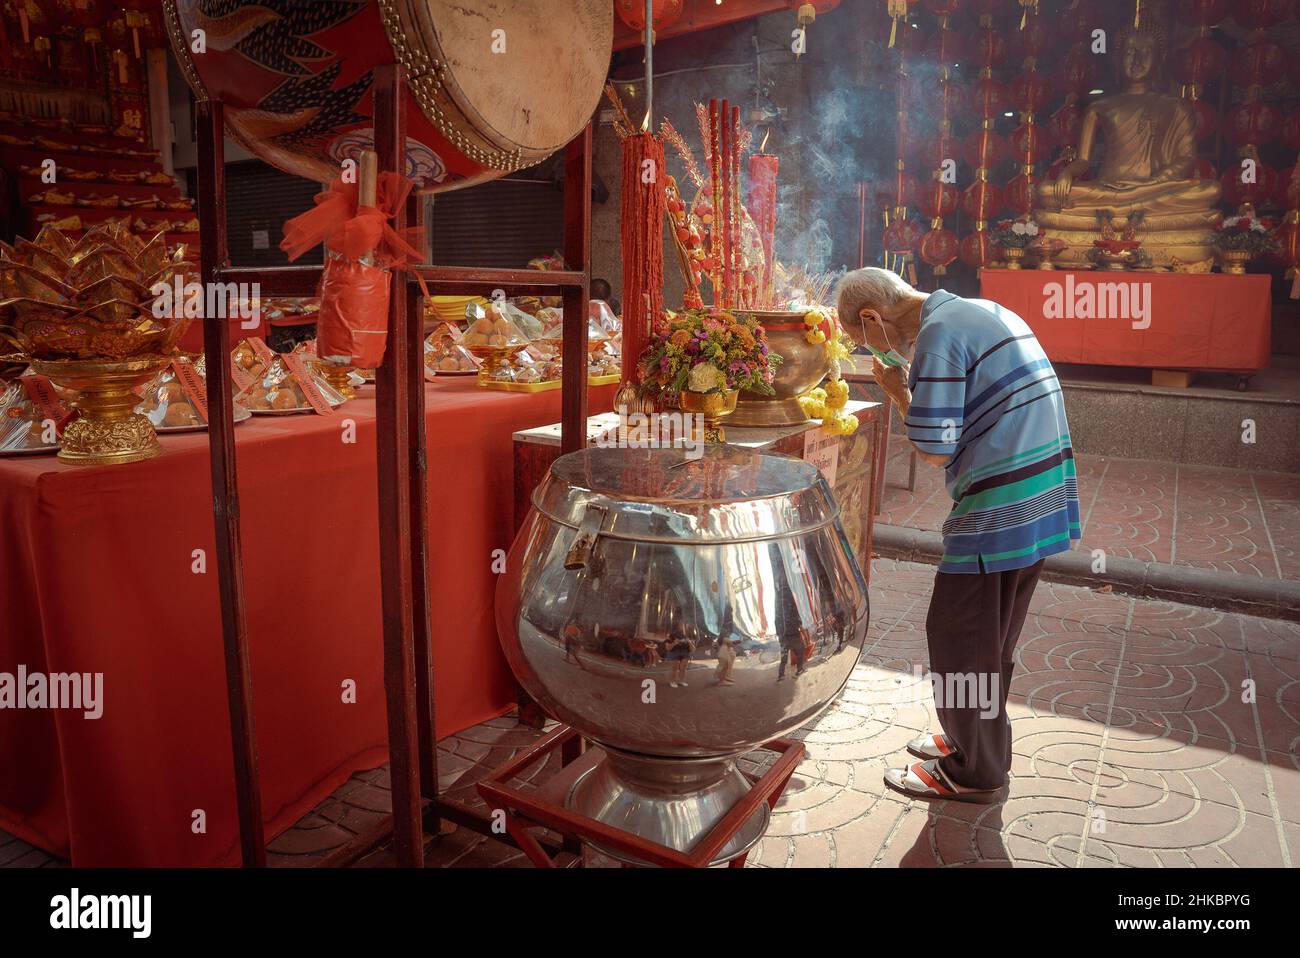 A man bows in prayer outside a shrine with offerings laid out.The Lunar New Year in Bangkok this year is a more solemn affair than in previous years. The government had technically canceled large celebrations, but in Chinatown, a troupe of lion dancers slowed down oncoming traffic on Yaowrat road. On a side street at Wat Lokanukroh, the only excitement for the day was the outbreak of a small fire caused when large lit red candles collapsed on one another; custodians rushed for a fire extinguisher. Many Thais of Chinese descent continued to perform rites and prayers at the shrine undisturbed. ( Stock Photo